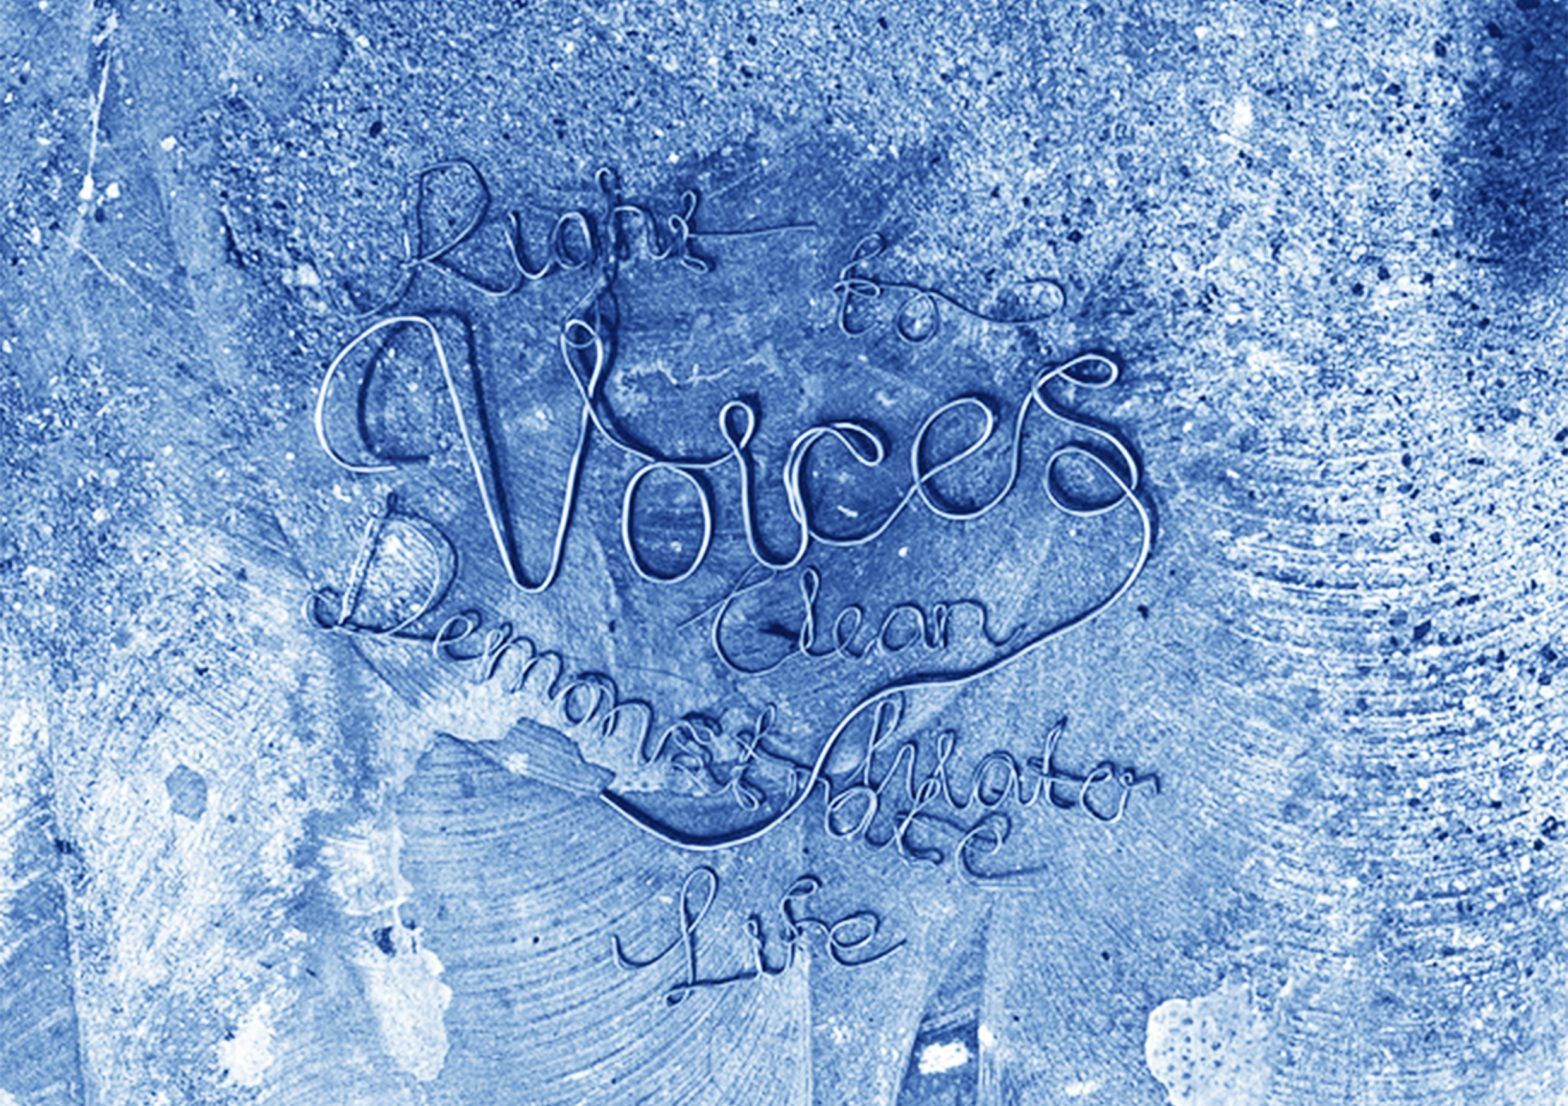 Words made of wire on a textured blue surface, with the central word reading: Voices